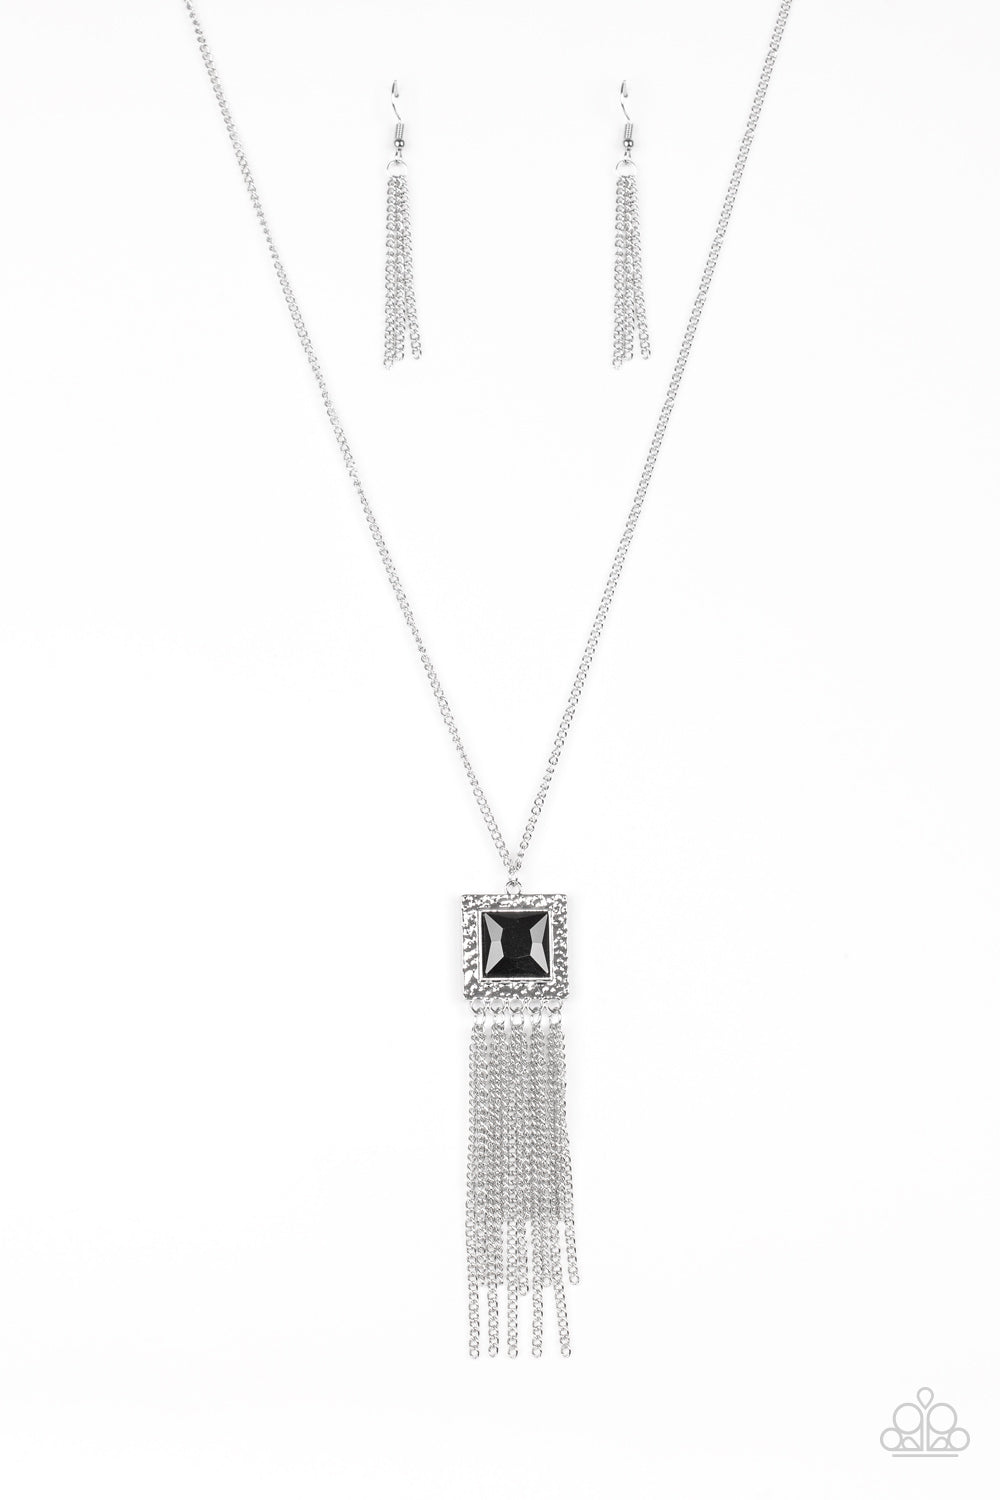 Shimmer Sensei - Black and Silver Necklace - Paparazzi Accessories - Swinging from the bottom of a lengthened silver chain, a delicately hammered square frame gives way to a shimmery silver fringe. Featuring a regal square cut, a glittery black gem is pressed into the center of the pendant for an edgy look. Features an adjustable clasp closure. Sold as one individual necklace.